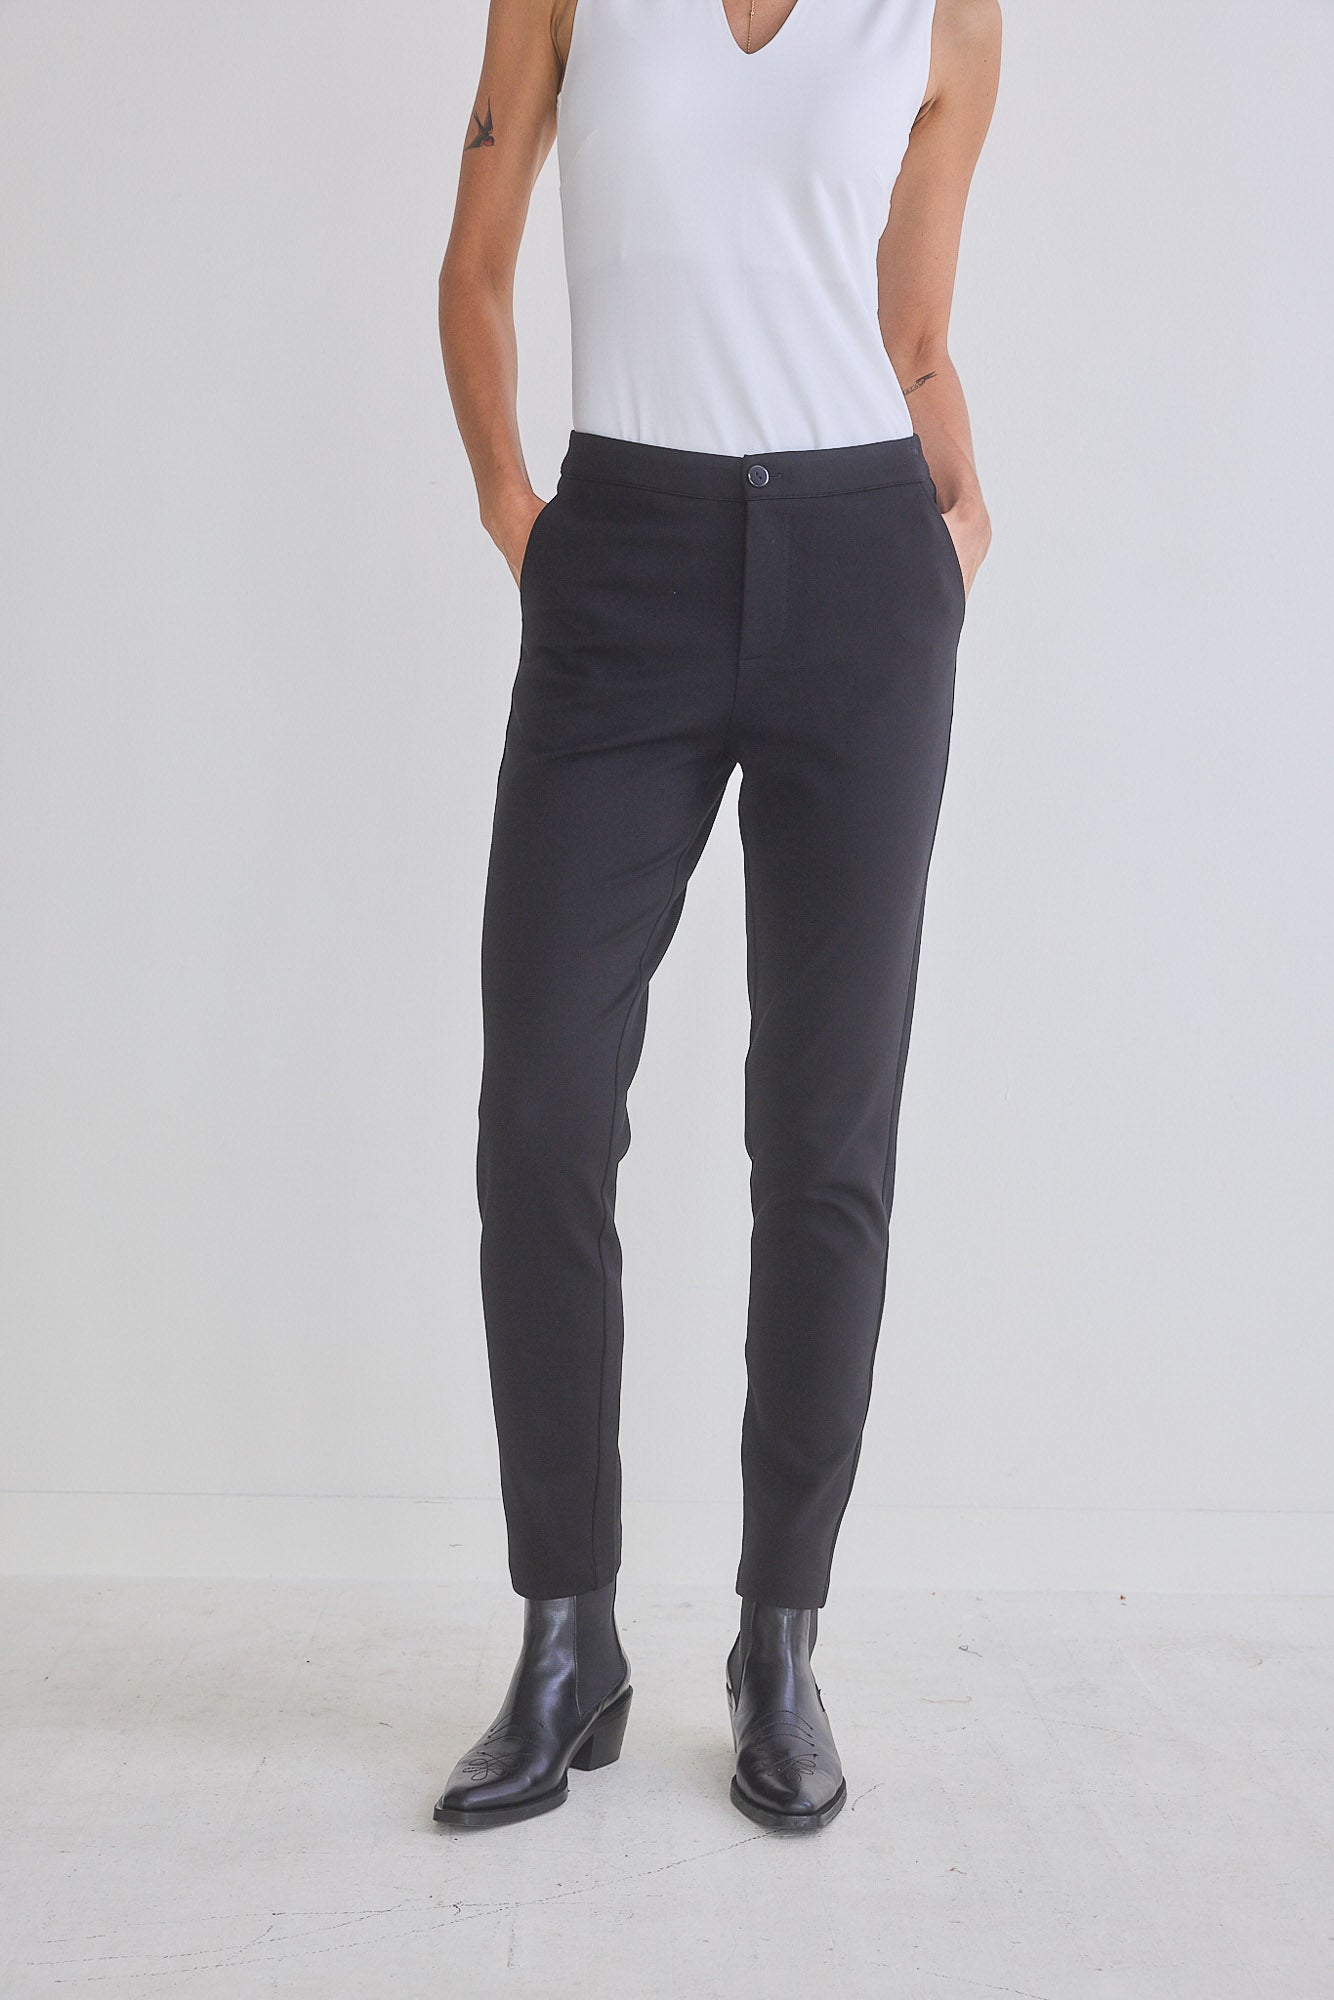 The Comfort Trouser